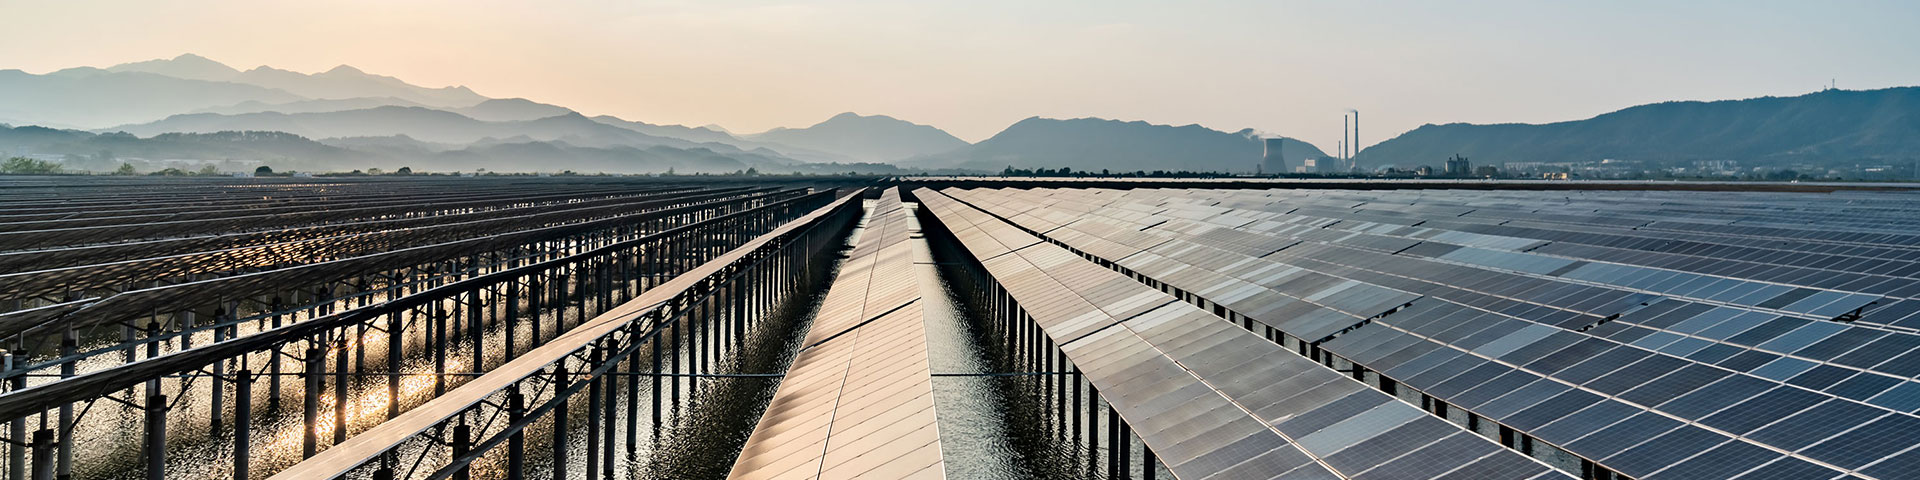 A solar park against a background of mountains. No information required (royalty-free image from Getty images)